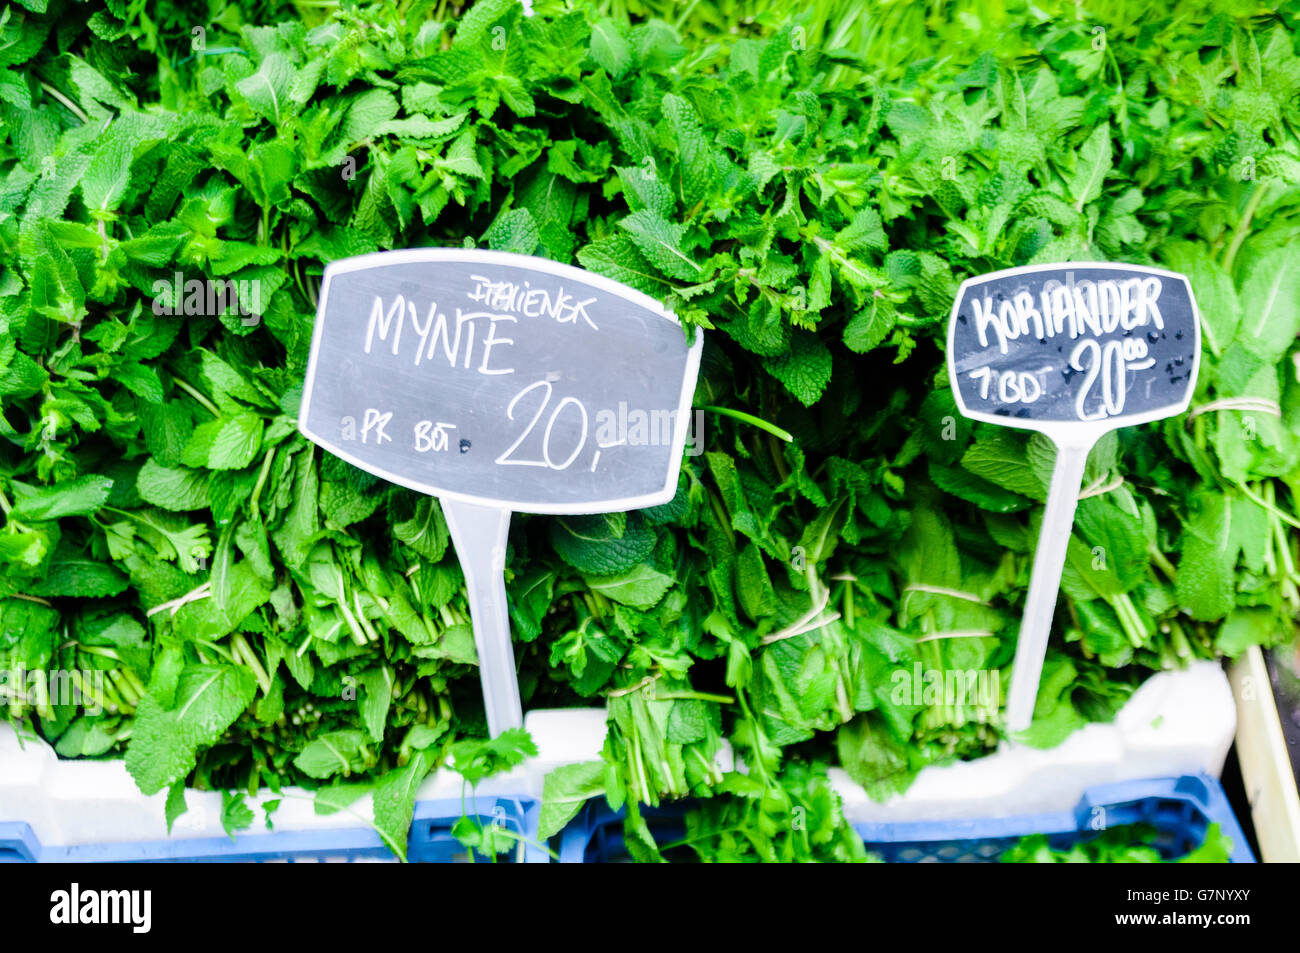 Mint and Coriander herbs (mynte, koriander) for sale at a Danish ...